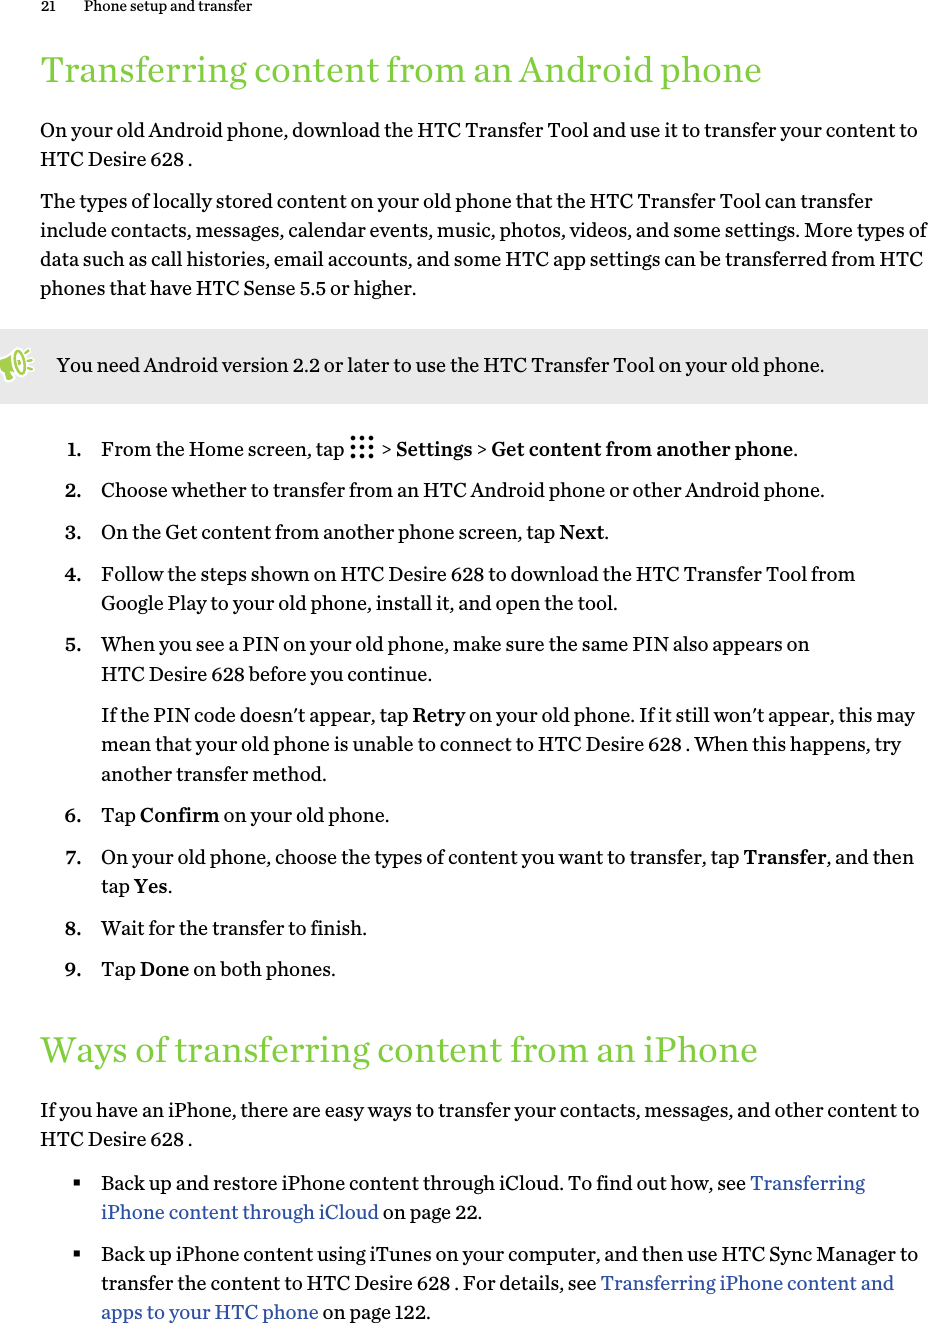 Transferring content from an Android phoneOn your old Android phone, download the HTC Transfer Tool and use it to transfer your content toHTC Desire 628 .The types of locally stored content on your old phone that the HTC Transfer Tool can transferinclude contacts, messages, calendar events, music, photos, videos, and some settings. More types ofdata such as call histories, email accounts, and some HTC app settings can be transferred from HTCphones that have HTC Sense 5.5 or higher.You need Android version 2.2 or later to use the HTC Transfer Tool on your old phone.1. From the Home screen, tap   &gt; Settings &gt; Get content from another phone.2. Choose whether to transfer from an HTC Android phone or other Android phone.3. On the Get content from another phone screen, tap Next.4. Follow the steps shown on HTC Desire 628 to download the HTC Transfer Tool fromGoogle Play to your old phone, install it, and open the tool.5. When you see a PIN on your old phone, make sure the same PIN also appears onHTC Desire 628 before you continue. If the PIN code doesn&apos;t appear, tap Retry on your old phone. If it still won&apos;t appear, this maymean that your old phone is unable to connect to HTC Desire 628 . When this happens, tryanother transfer method.6. Tap Confirm on your old phone.7. On your old phone, choose the types of content you want to transfer, tap Transfer, and thentap Yes.8. Wait for the transfer to finish.9. Tap Done on both phones.Ways of transferring content from an iPhoneIf you have an iPhone, there are easy ways to transfer your contacts, messages, and other content toHTC Desire 628 .§Back up and restore iPhone content through iCloud. To find out how, see TransferringiPhone content through iCloud on page 22.§Back up iPhone content using iTunes on your computer, and then use HTC Sync Manager totransfer the content to HTC Desire 628 . For details, see Transferring iPhone content andapps to your HTC phone on page 122.21 Phone setup and transfer